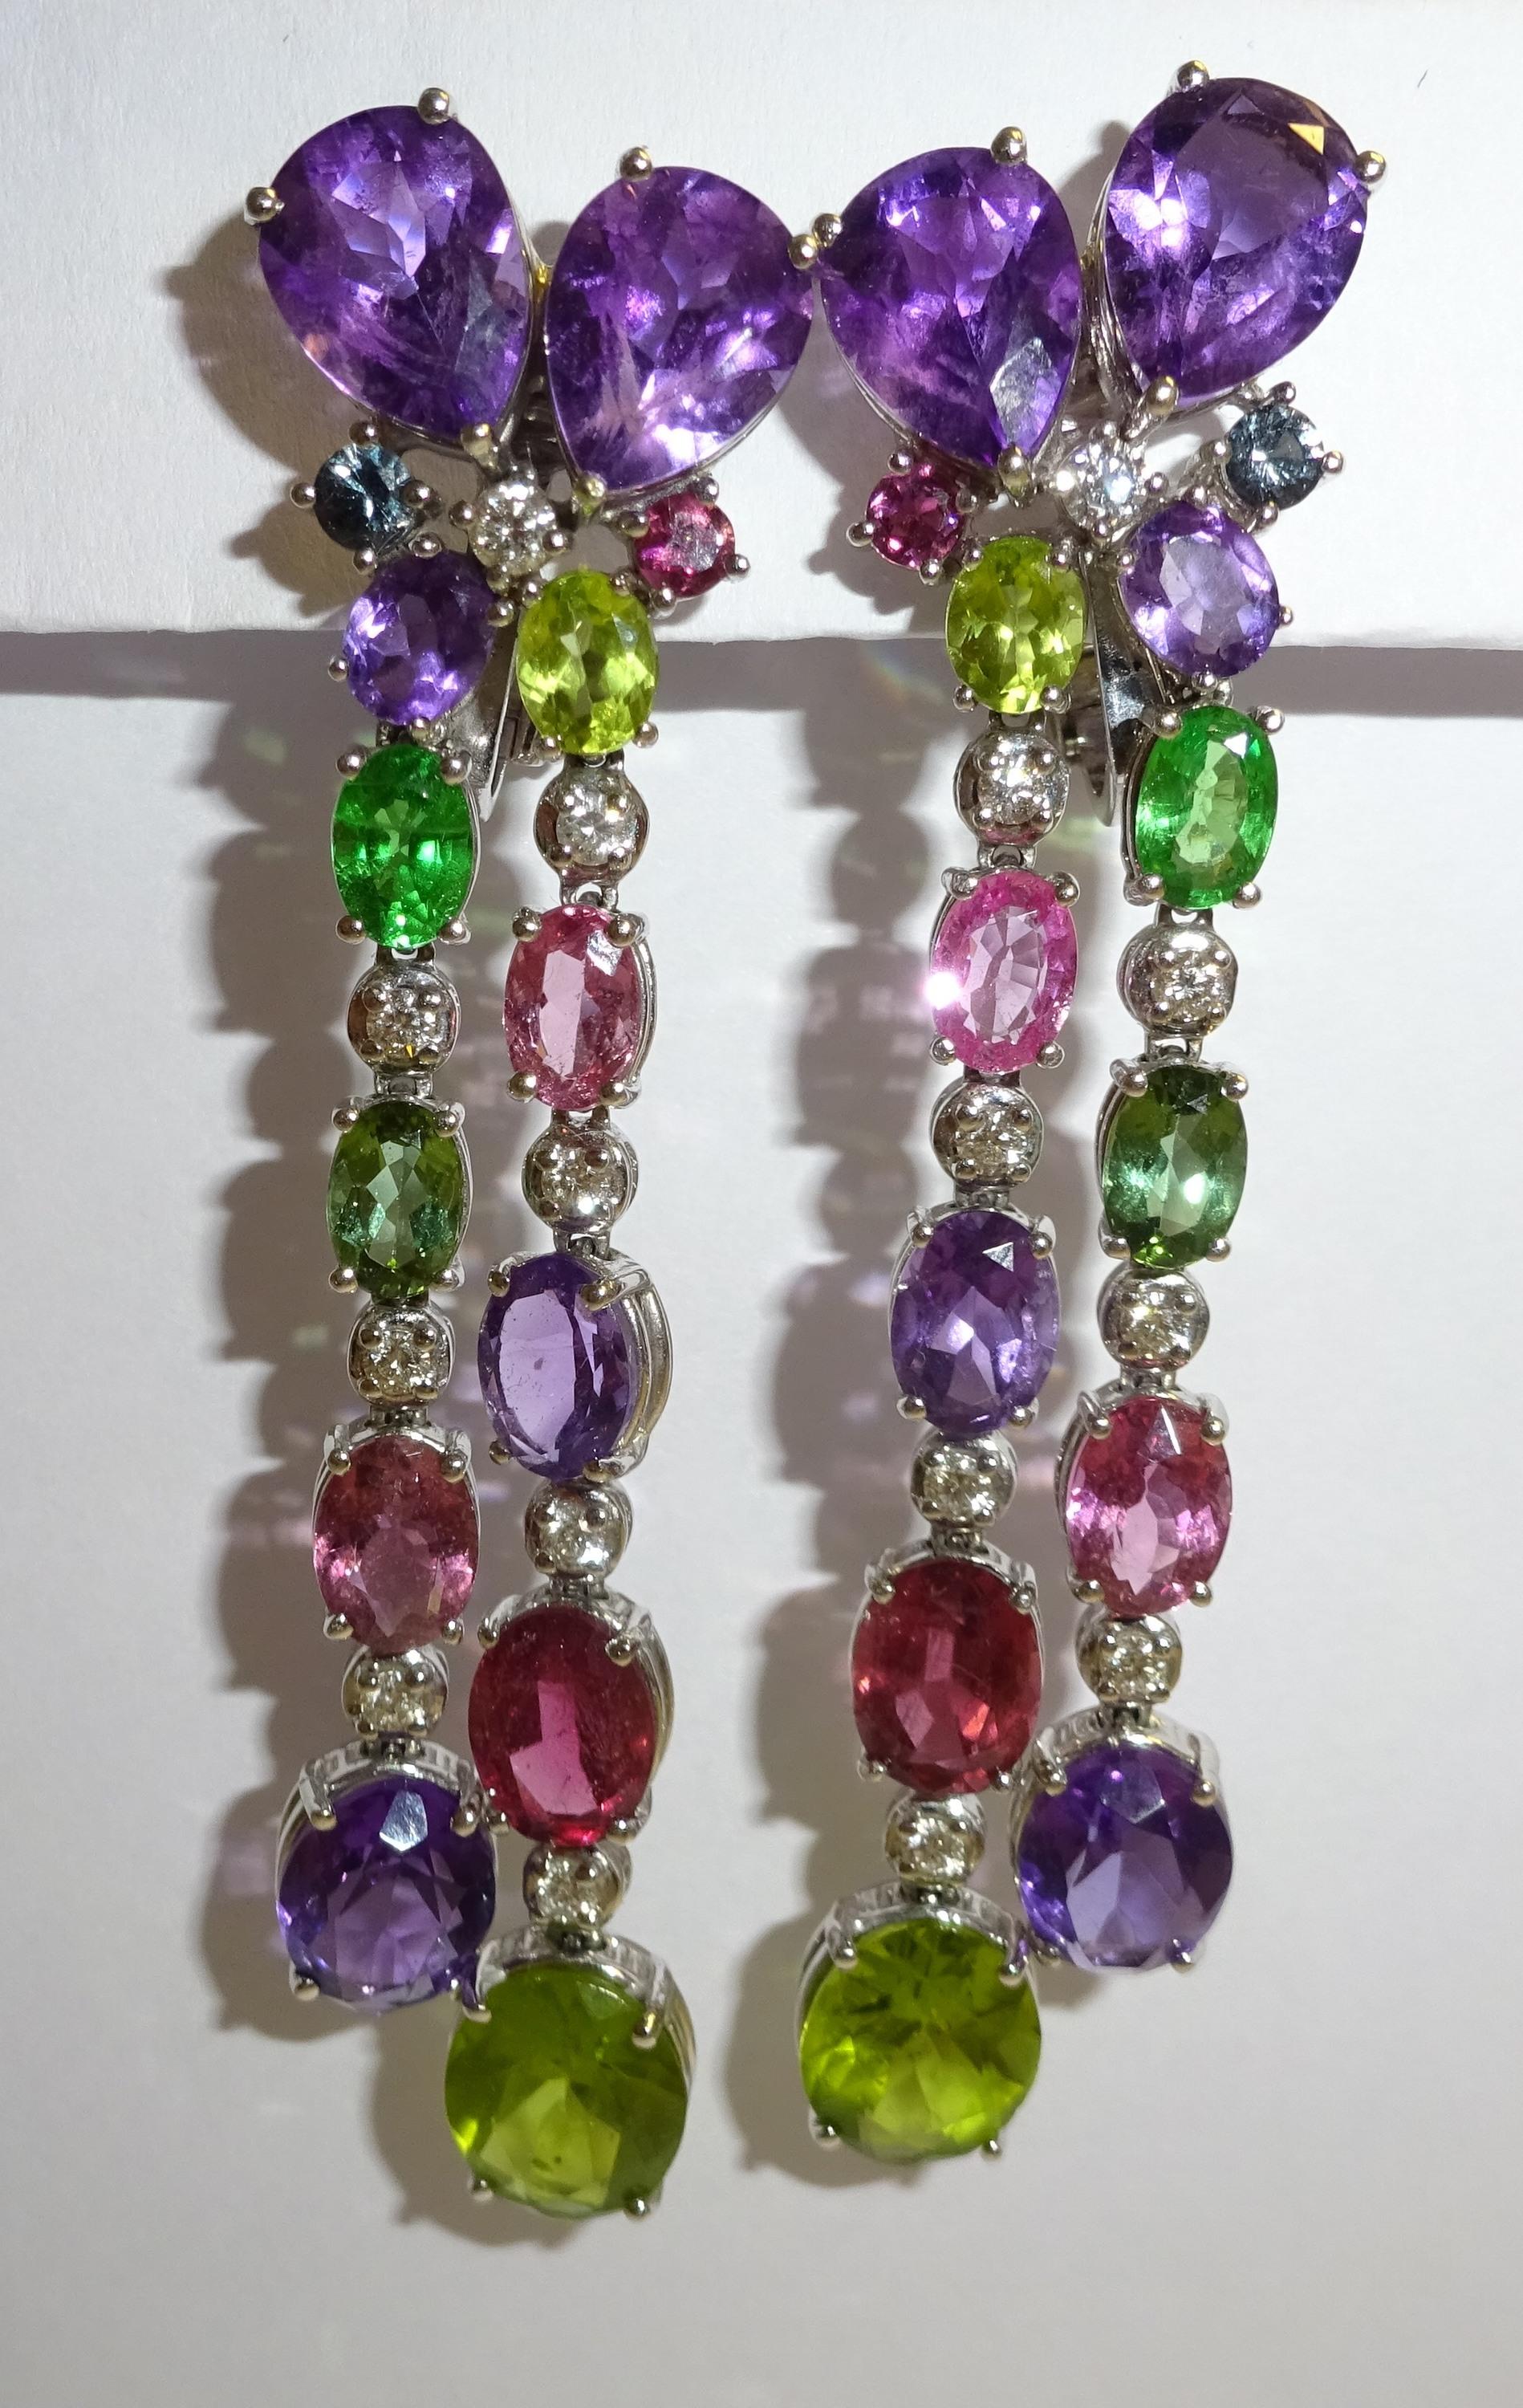 18 Karat White Gold Diamond and multicolor stones Dangle Earrings

16 Diam. 0.82 ct.
4 Sapphire pink 1.07 ct
4 Tourmaline pink 4.52 ct
2 Tourmaline green 1.21 ct
2 Garnet green 1.10 ct
4 Peridot 5.82 ct
10 Amethyst 11.26 ct







Founded in 1974,